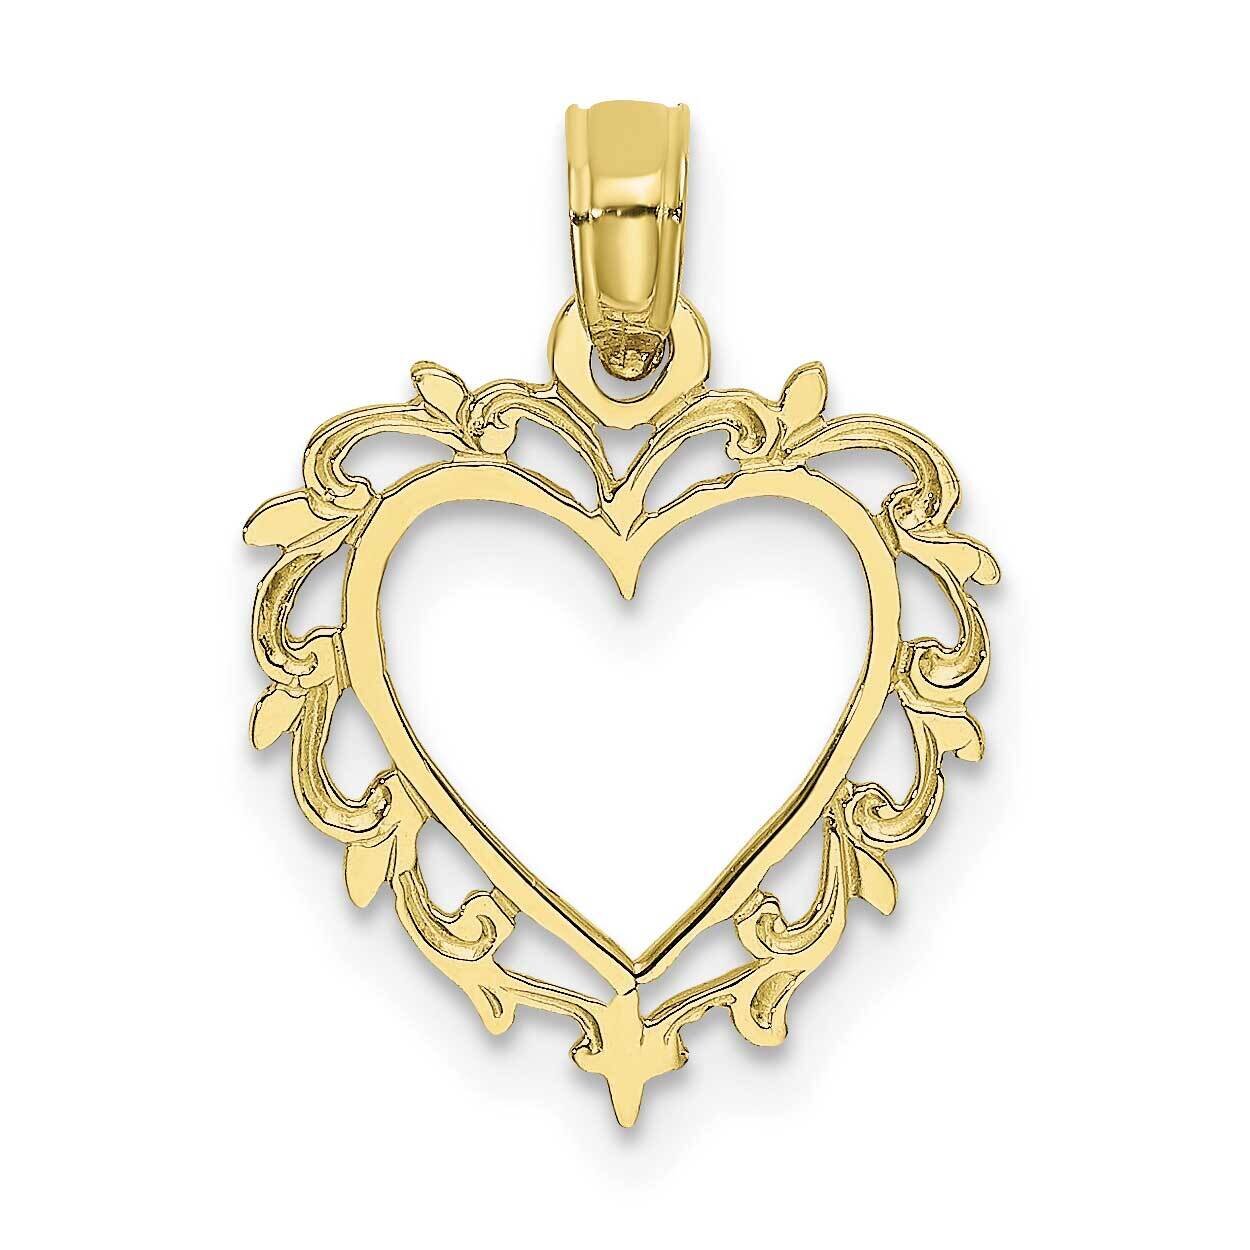 Heart with Lace Trim Charm 10k Gold 10K7099